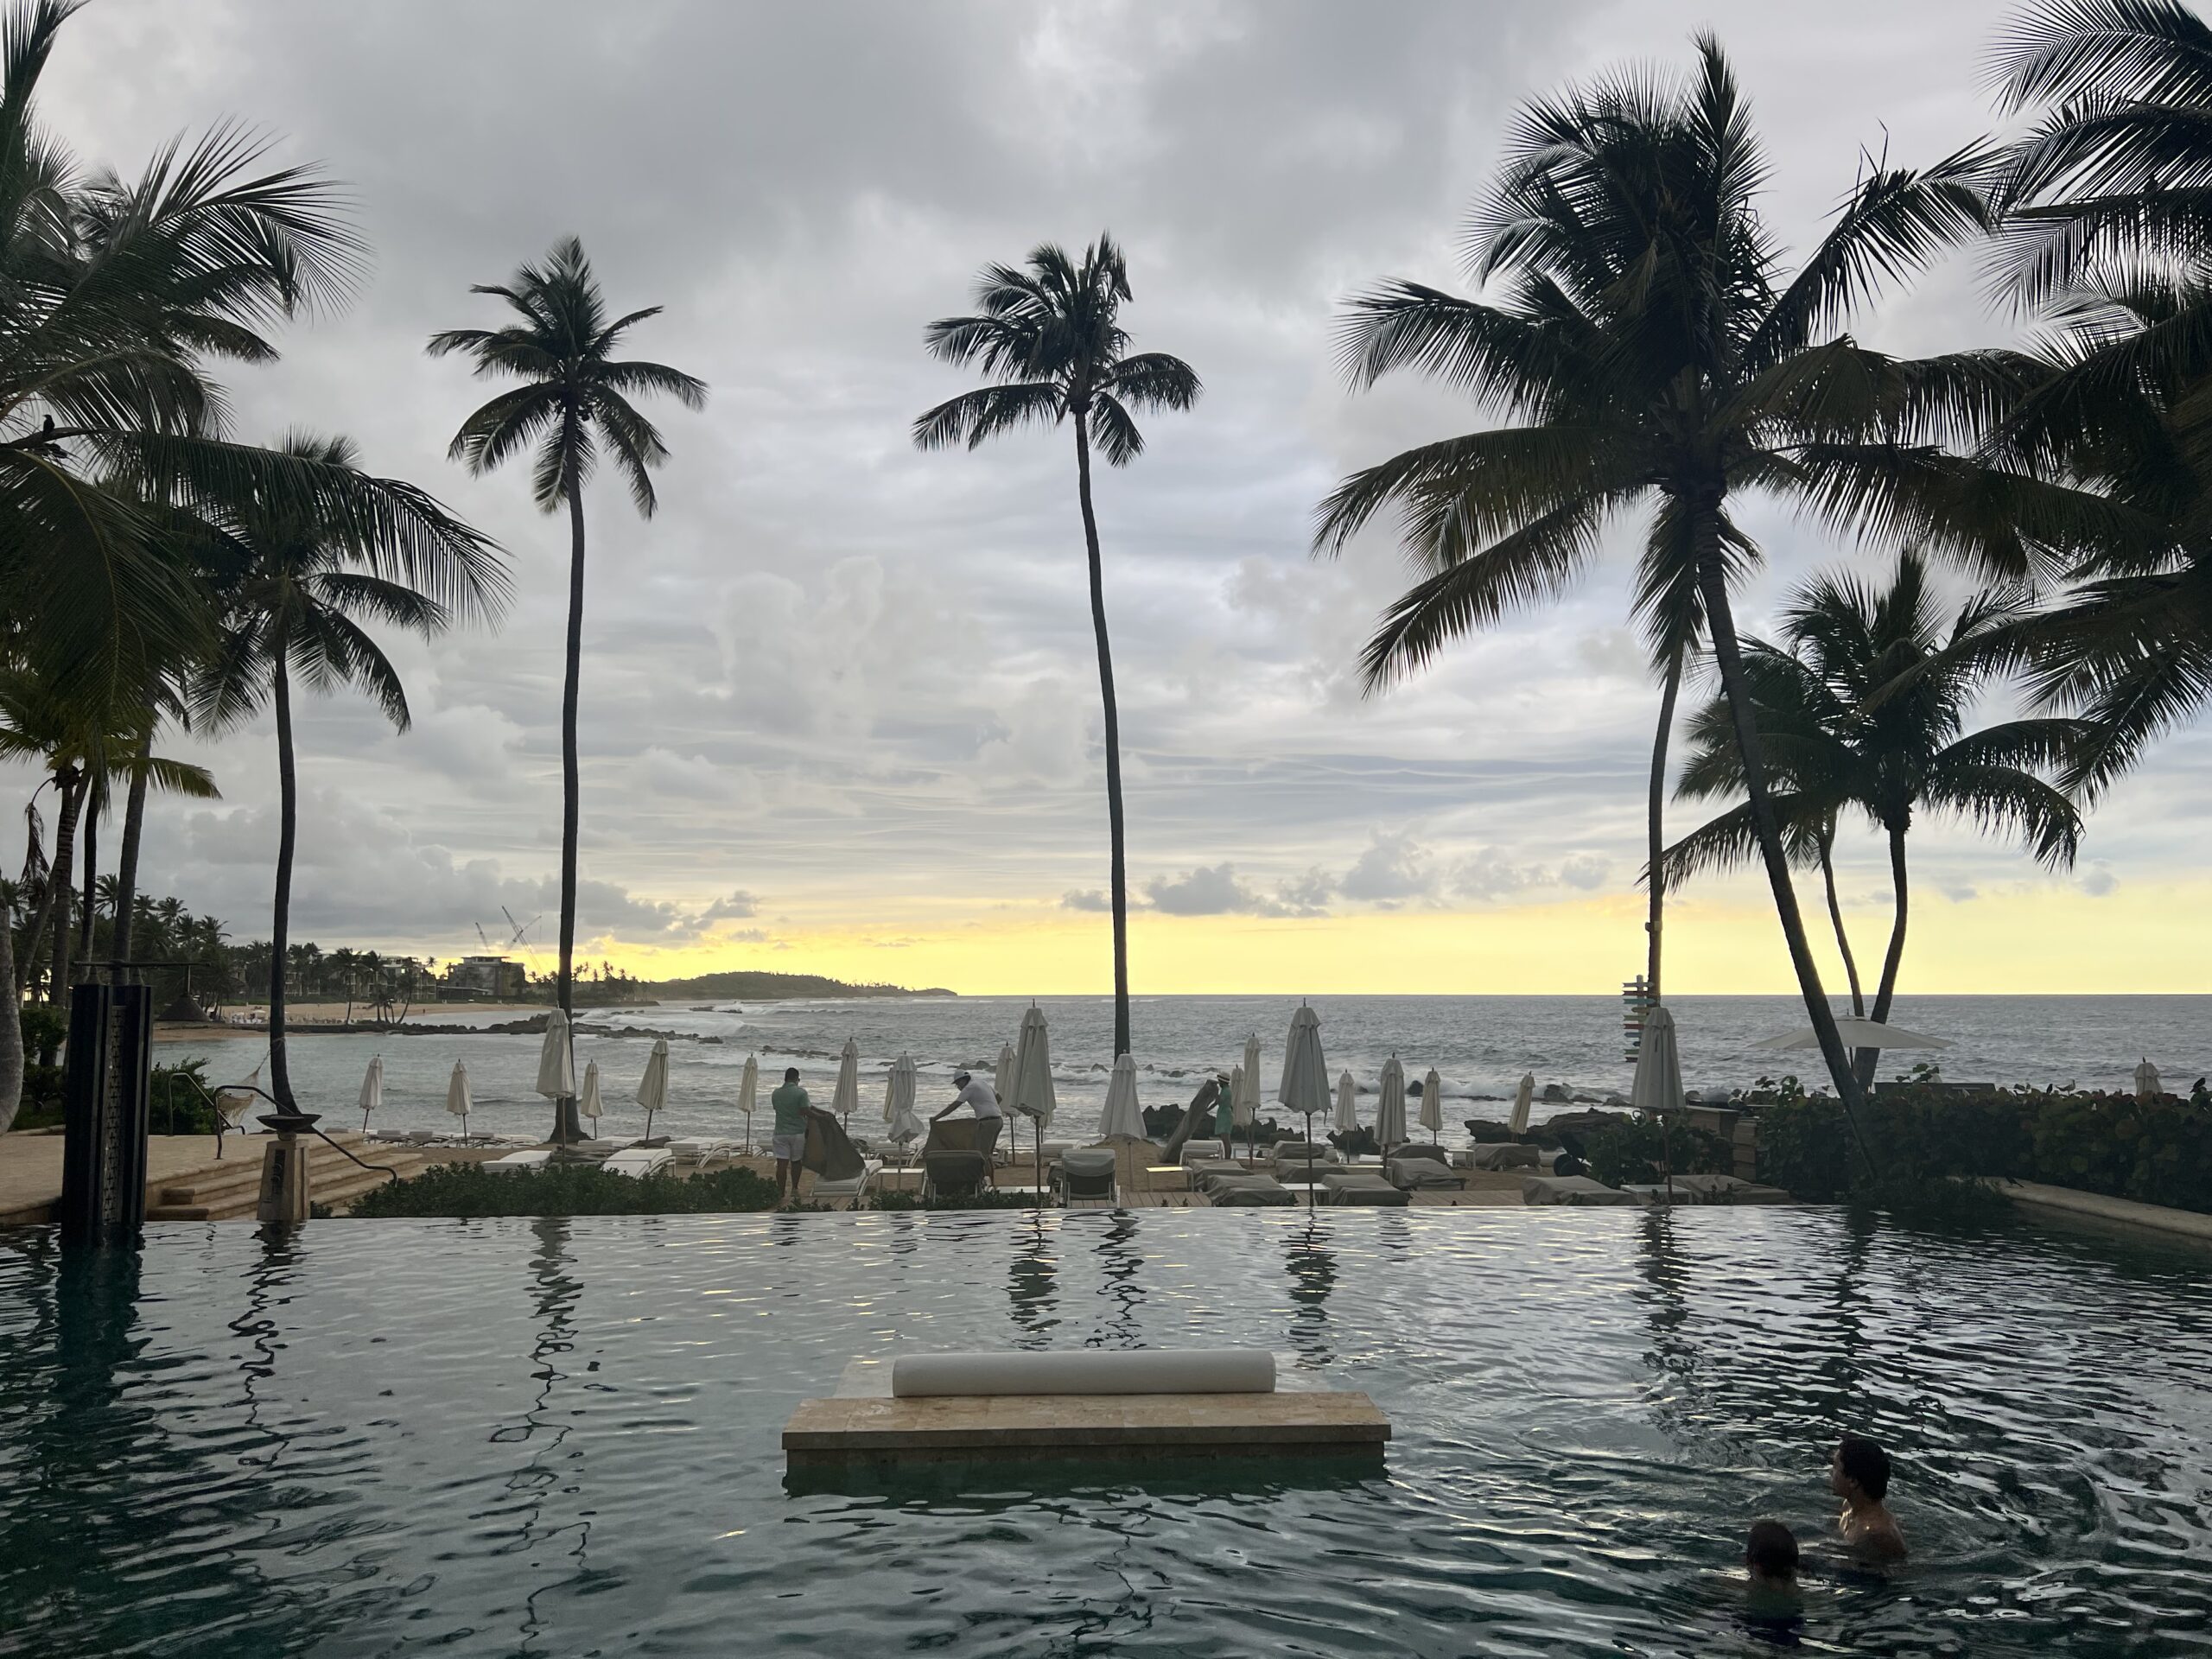 A pool in Puerto Rico overlooking a sunset with palm trees and beach chairs in the distance.